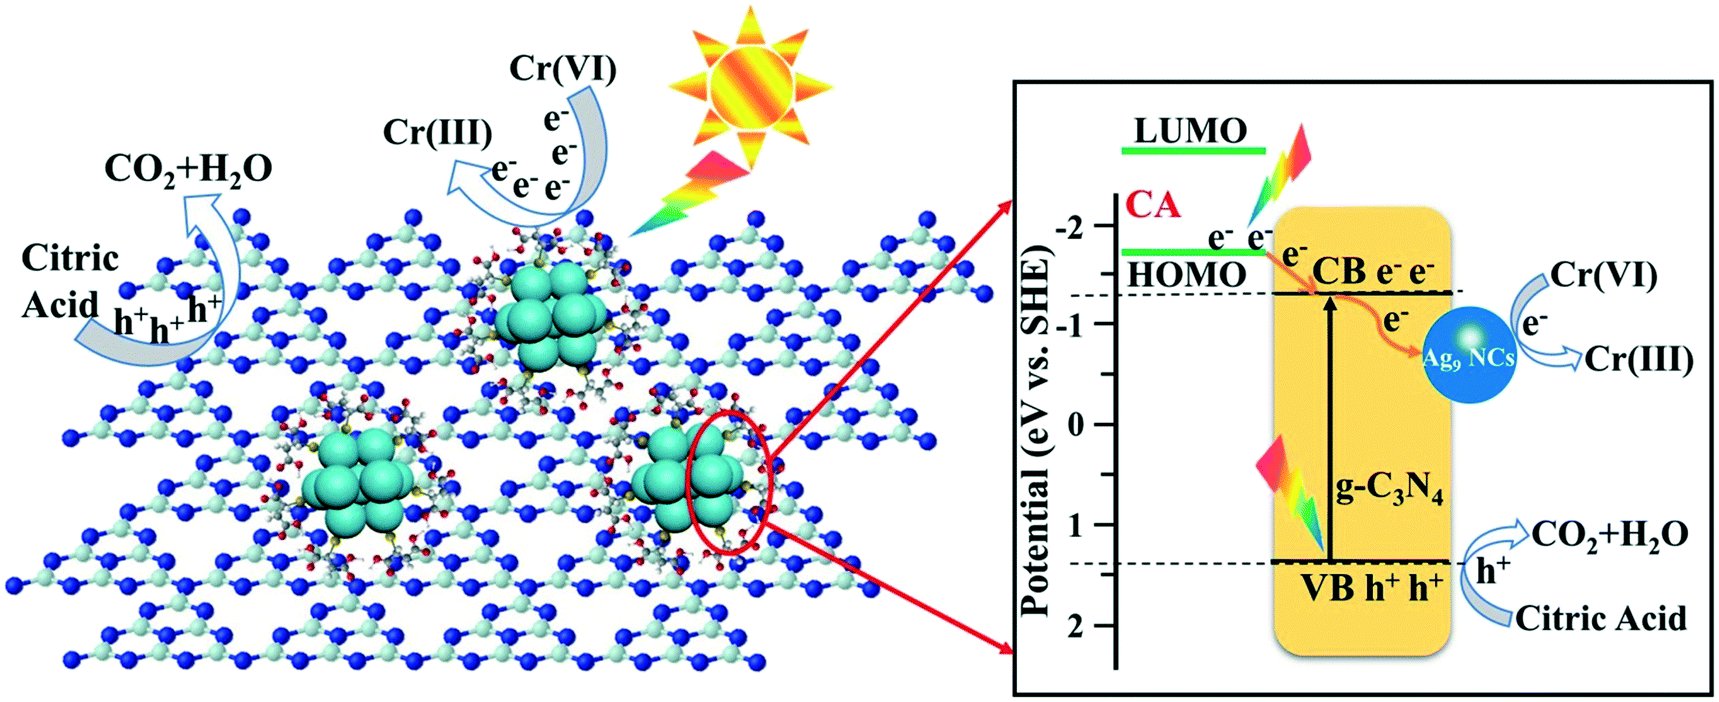 Enhanced Photocatalytic Reduction Of Cr Vi To Cr Iii Over G C 3 N 4 Catalysts With Ag Nanoclusters In Conjunction With Cr Iii Quantification Environmental Science Nano Rsc Publishing Doi 10 1039 D0enk